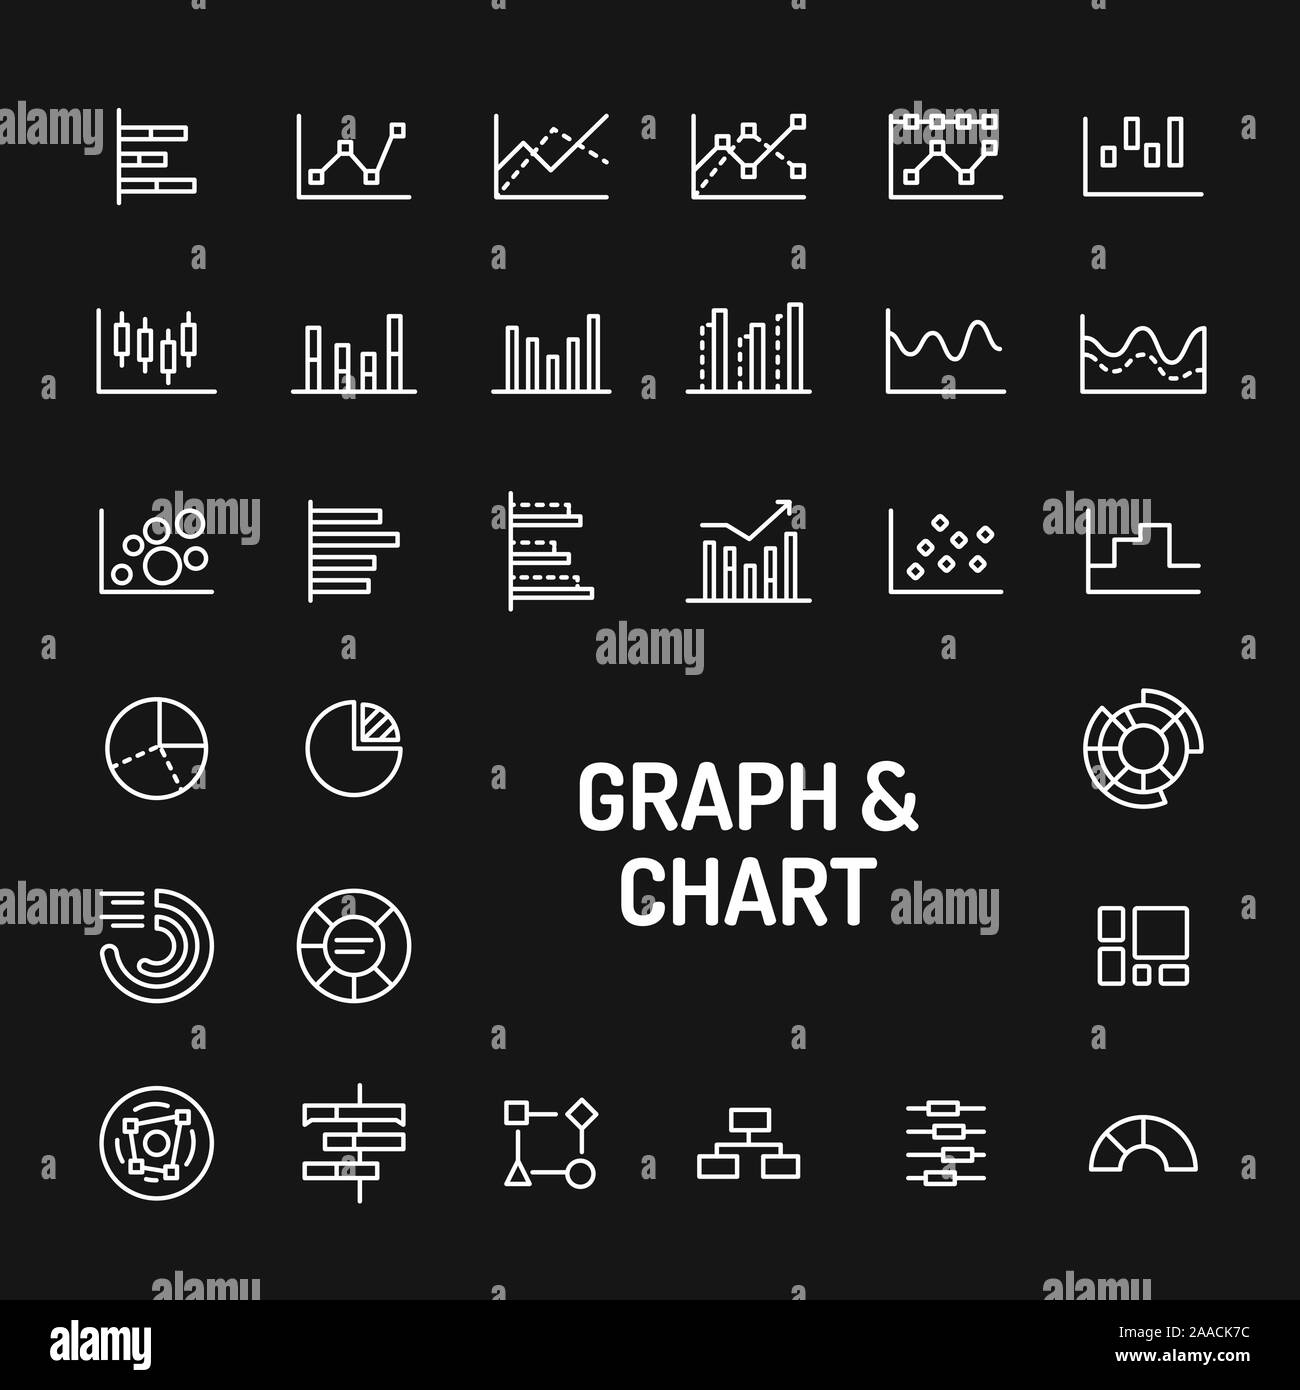 Simple white line icons isolated over black background related to graphs, diagrams and charts. Vector signs and symbols collections for website and de Stock Vector